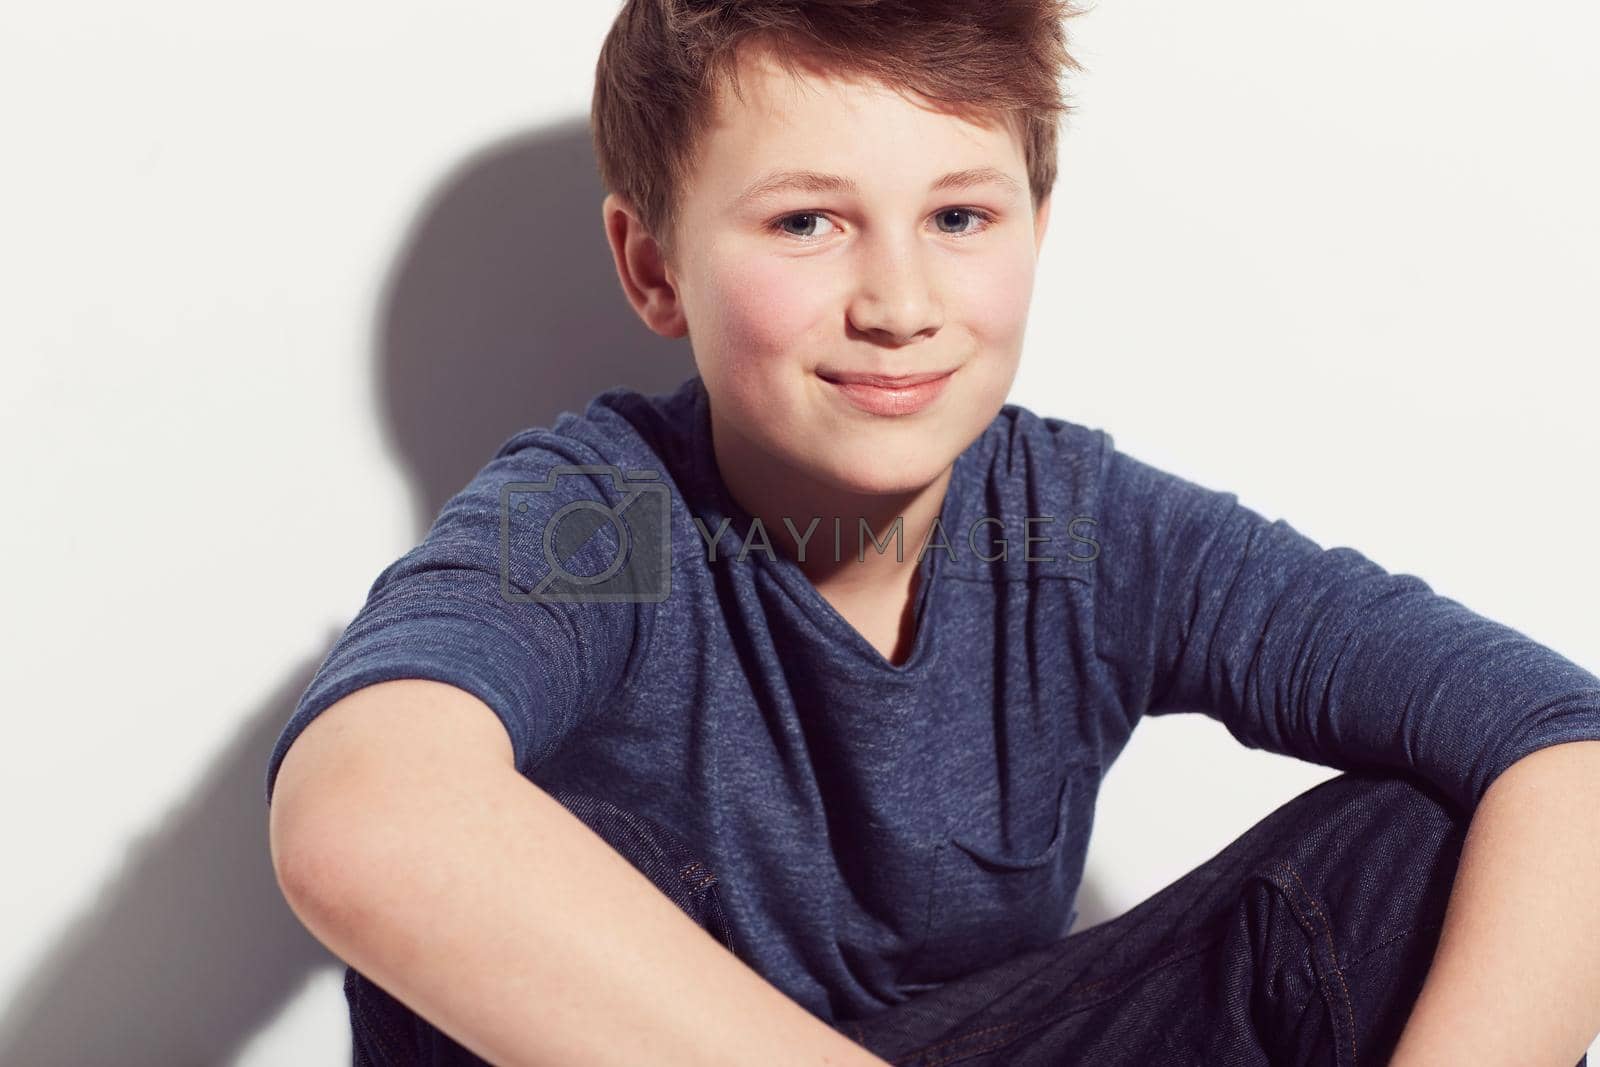 Royalty free image of Filled with potential. Young adolescent boy sitting against a white background with a smile. by YuriArcurs